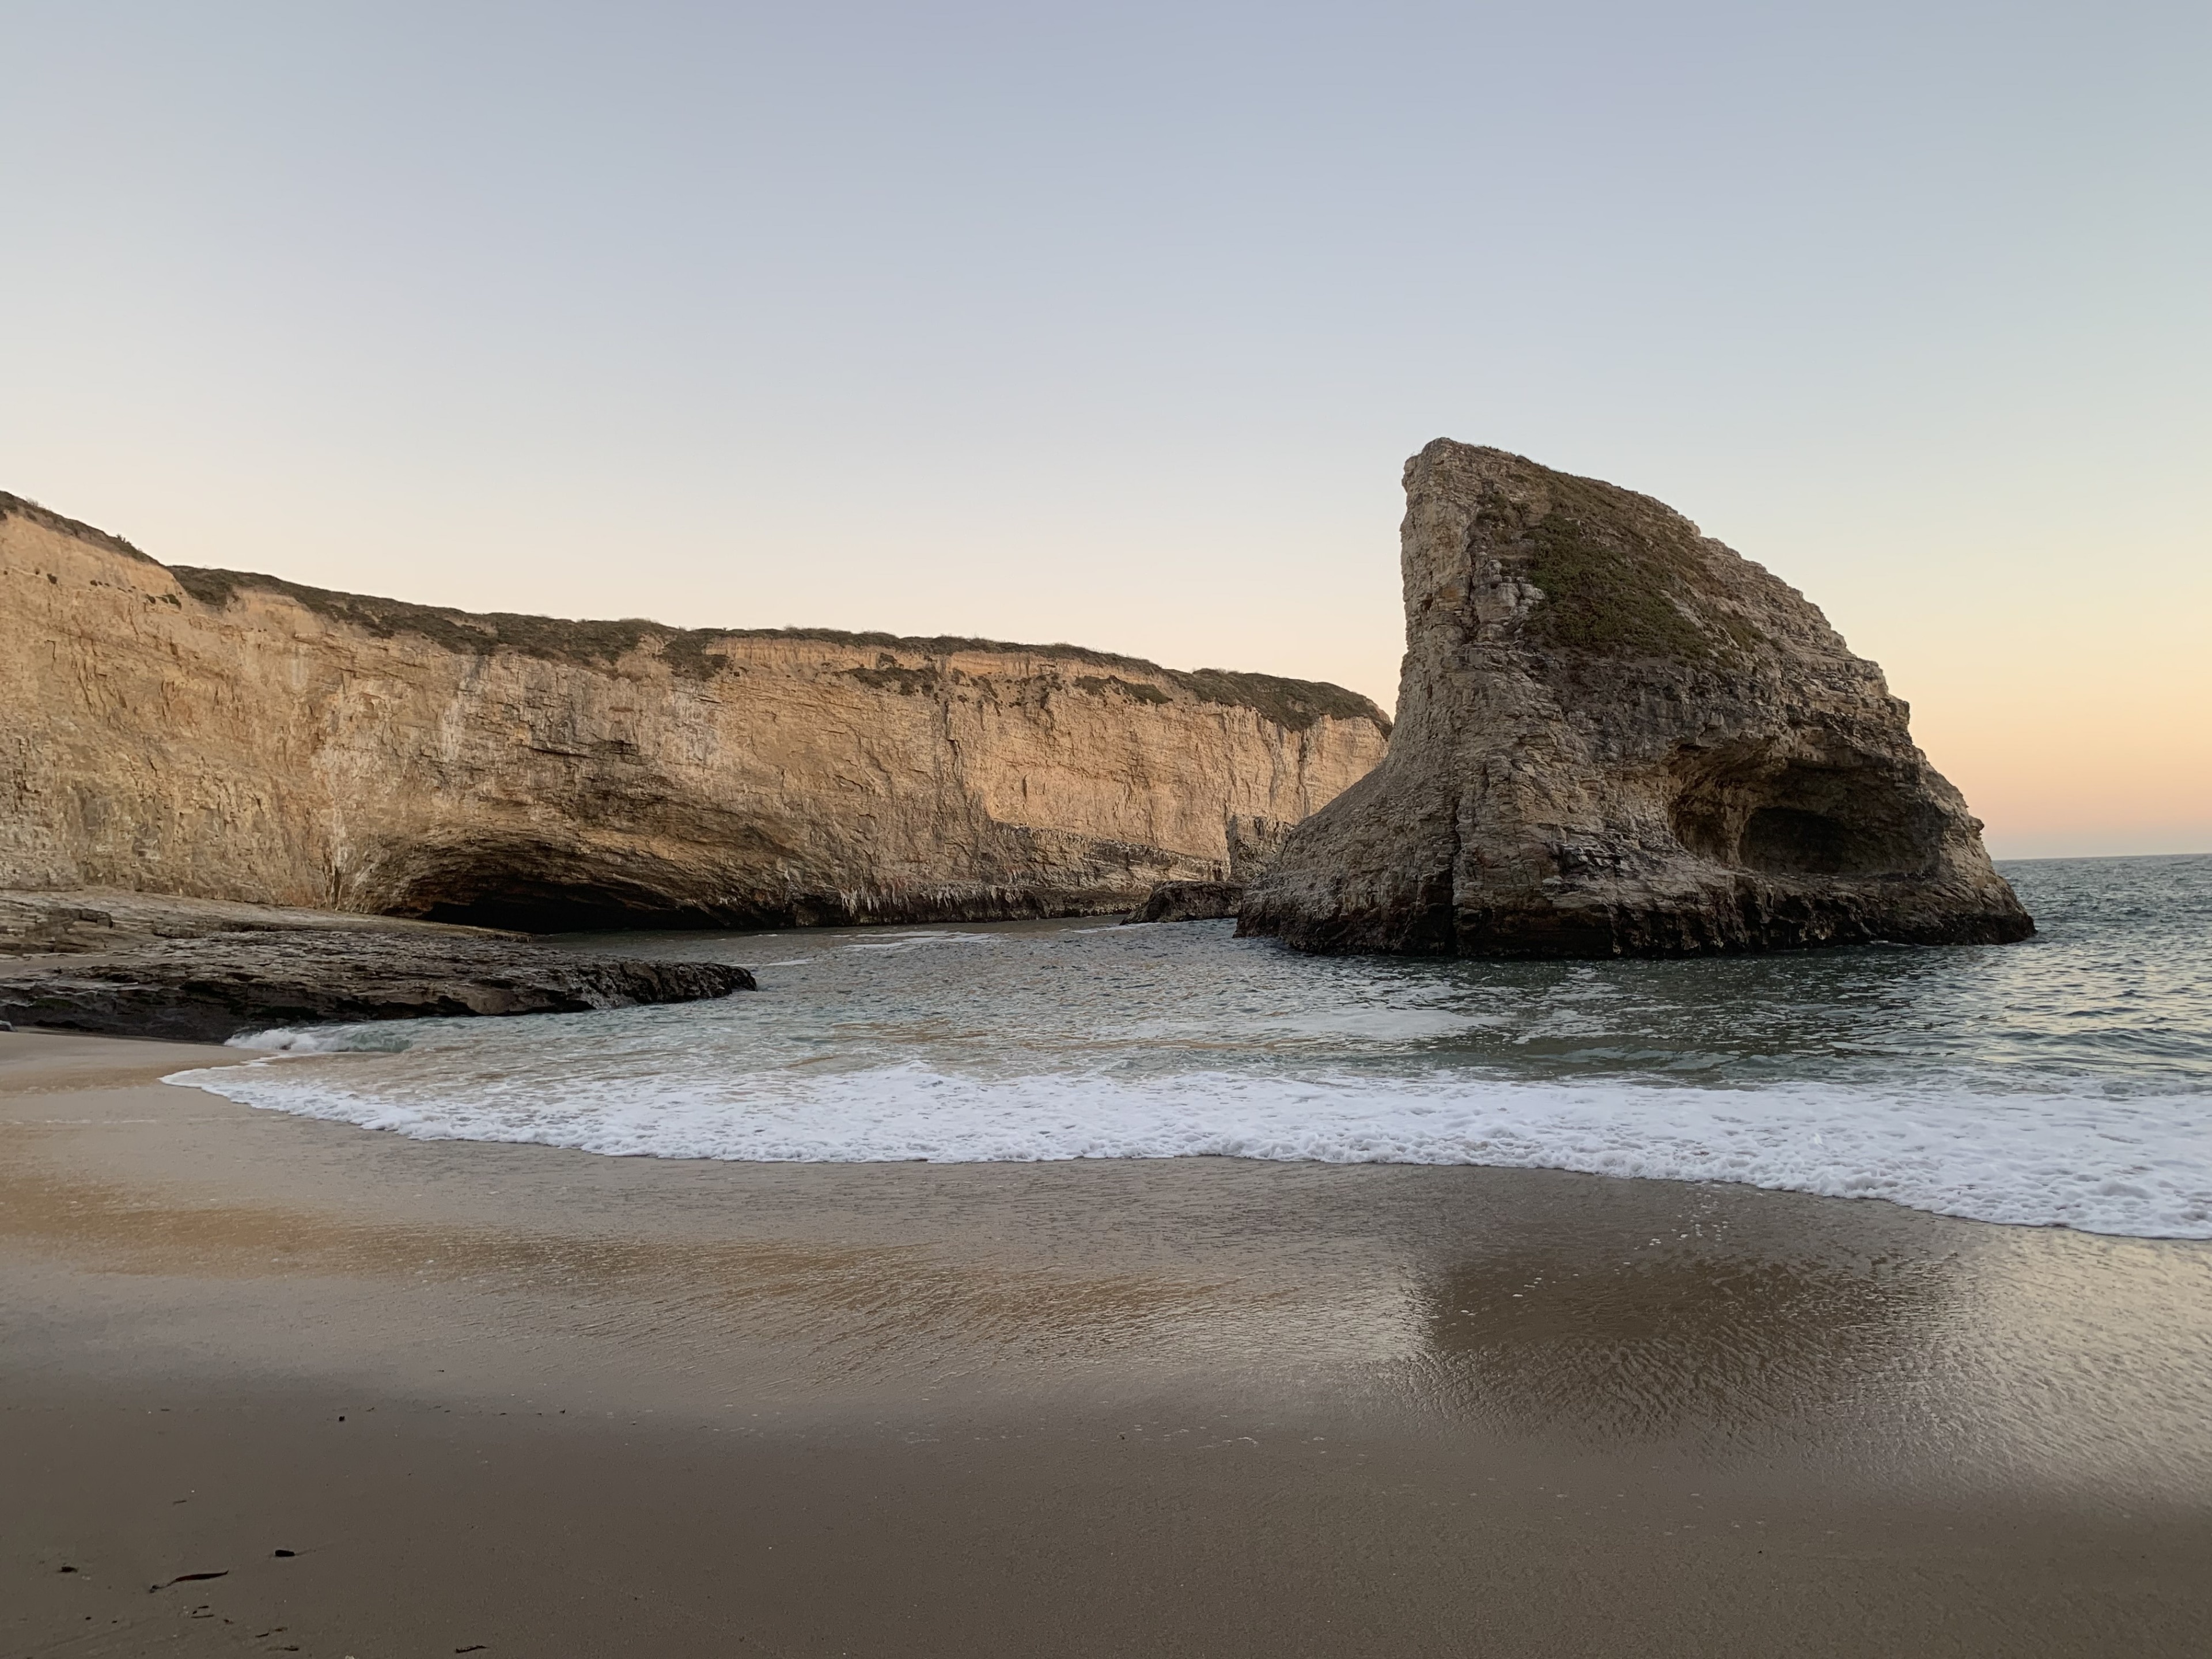 Nice little stop off of highway 1 in the little town of Davenport. A friend and I stayed at Davenport Roadhouse, just down the street a bit. Nice spot with a hotel, restaurant and live music. 
#summer #nature #beachbound 
#california #highwayone